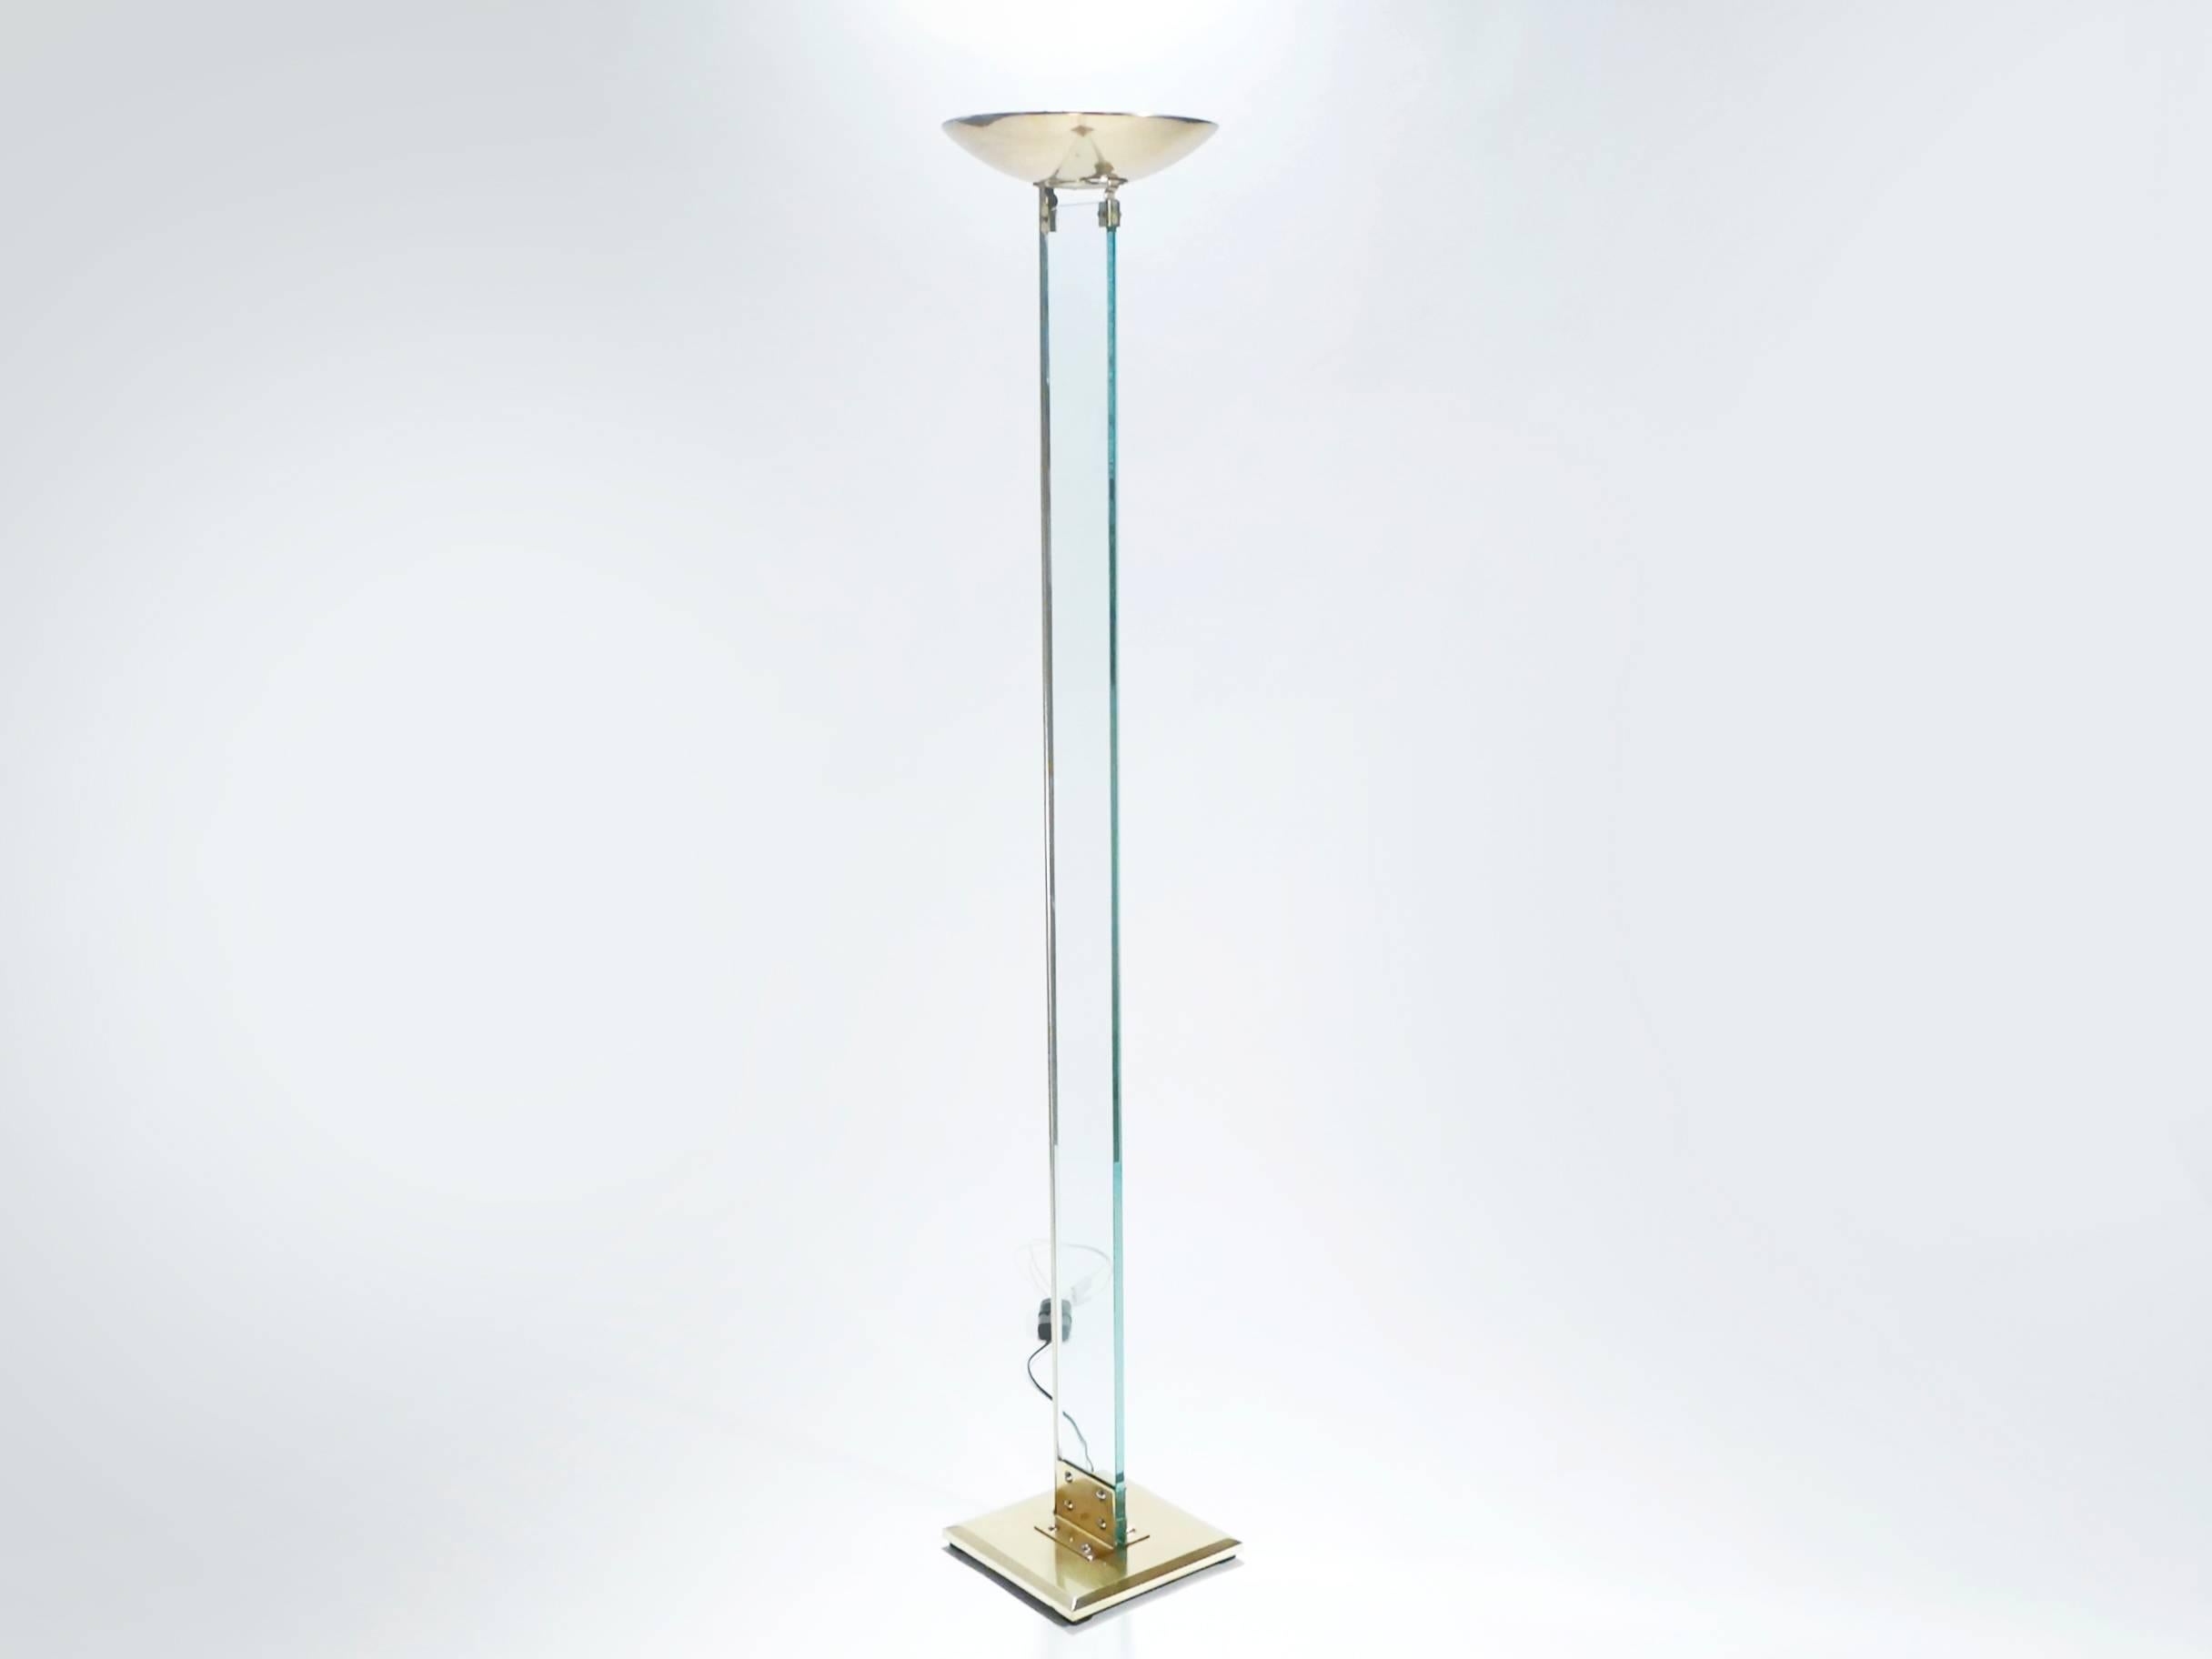 Glass and brass form this eye-catching halogen decorative lamp. Its structure is unique all the way down, from the shining brass bowl top supported by a thin sheet of glass, to the floating base. Casting an effortless Italian cool through the space